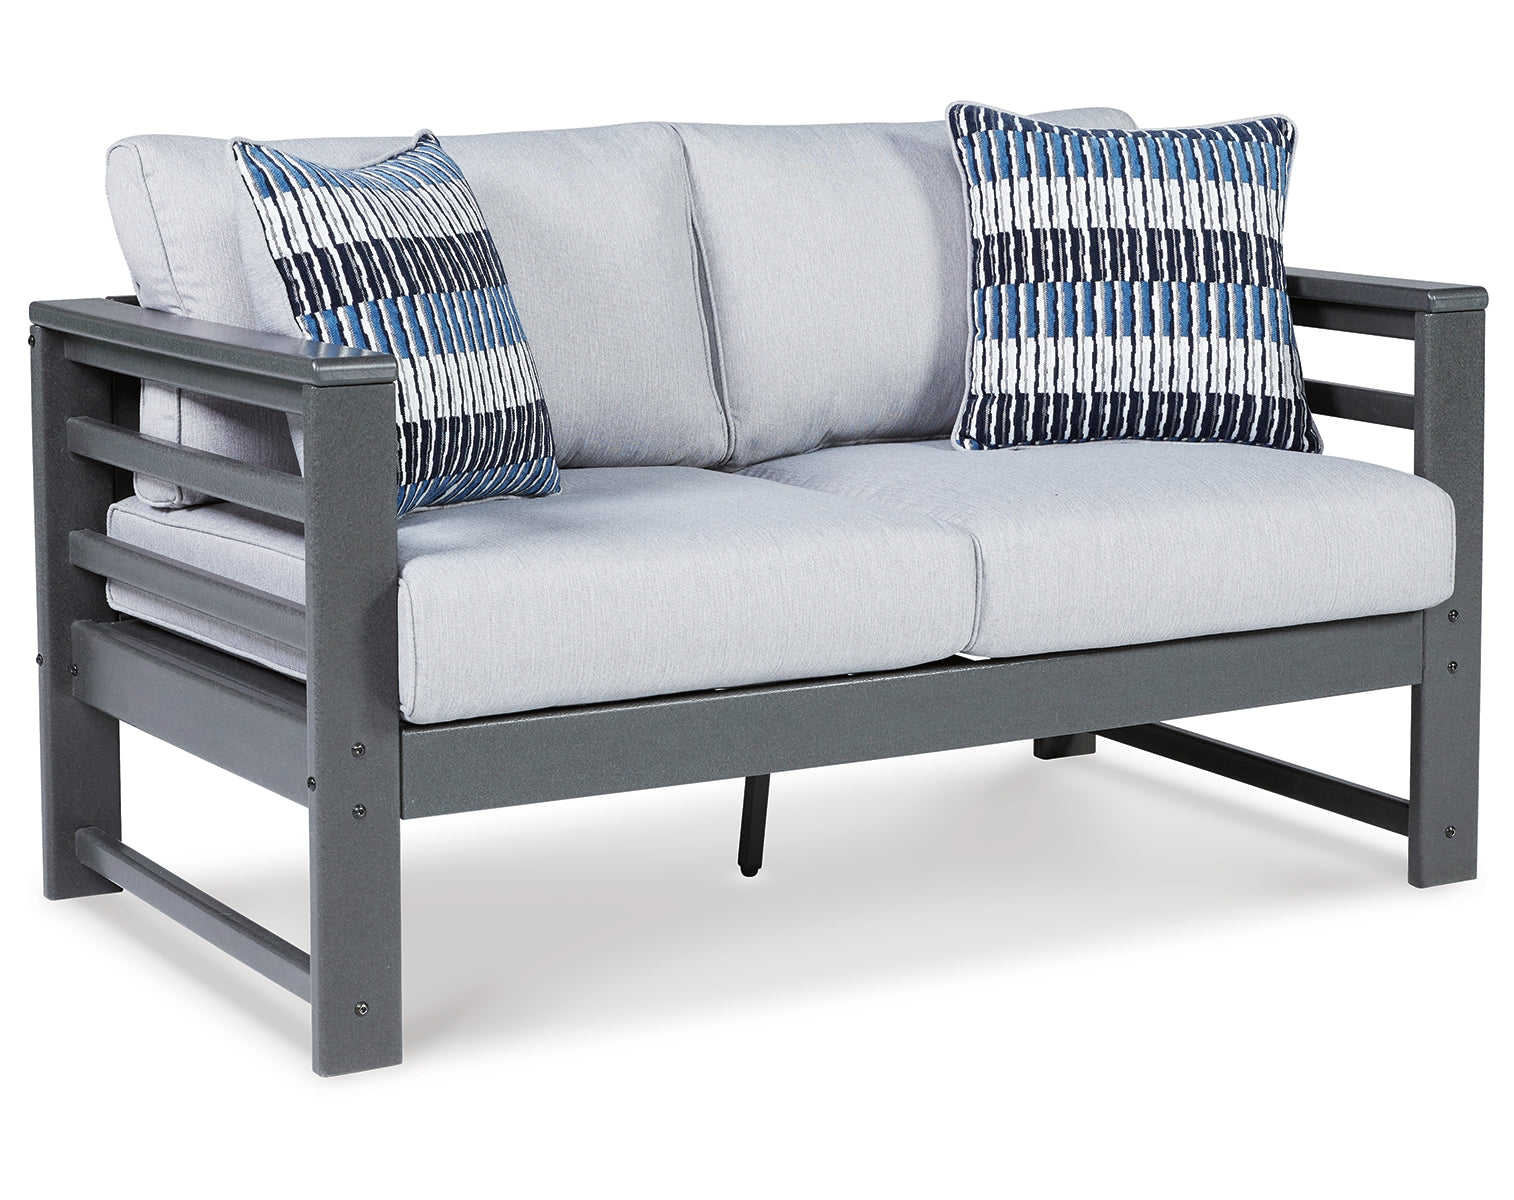 Amora Outdoor Loveseat with Coffee Table